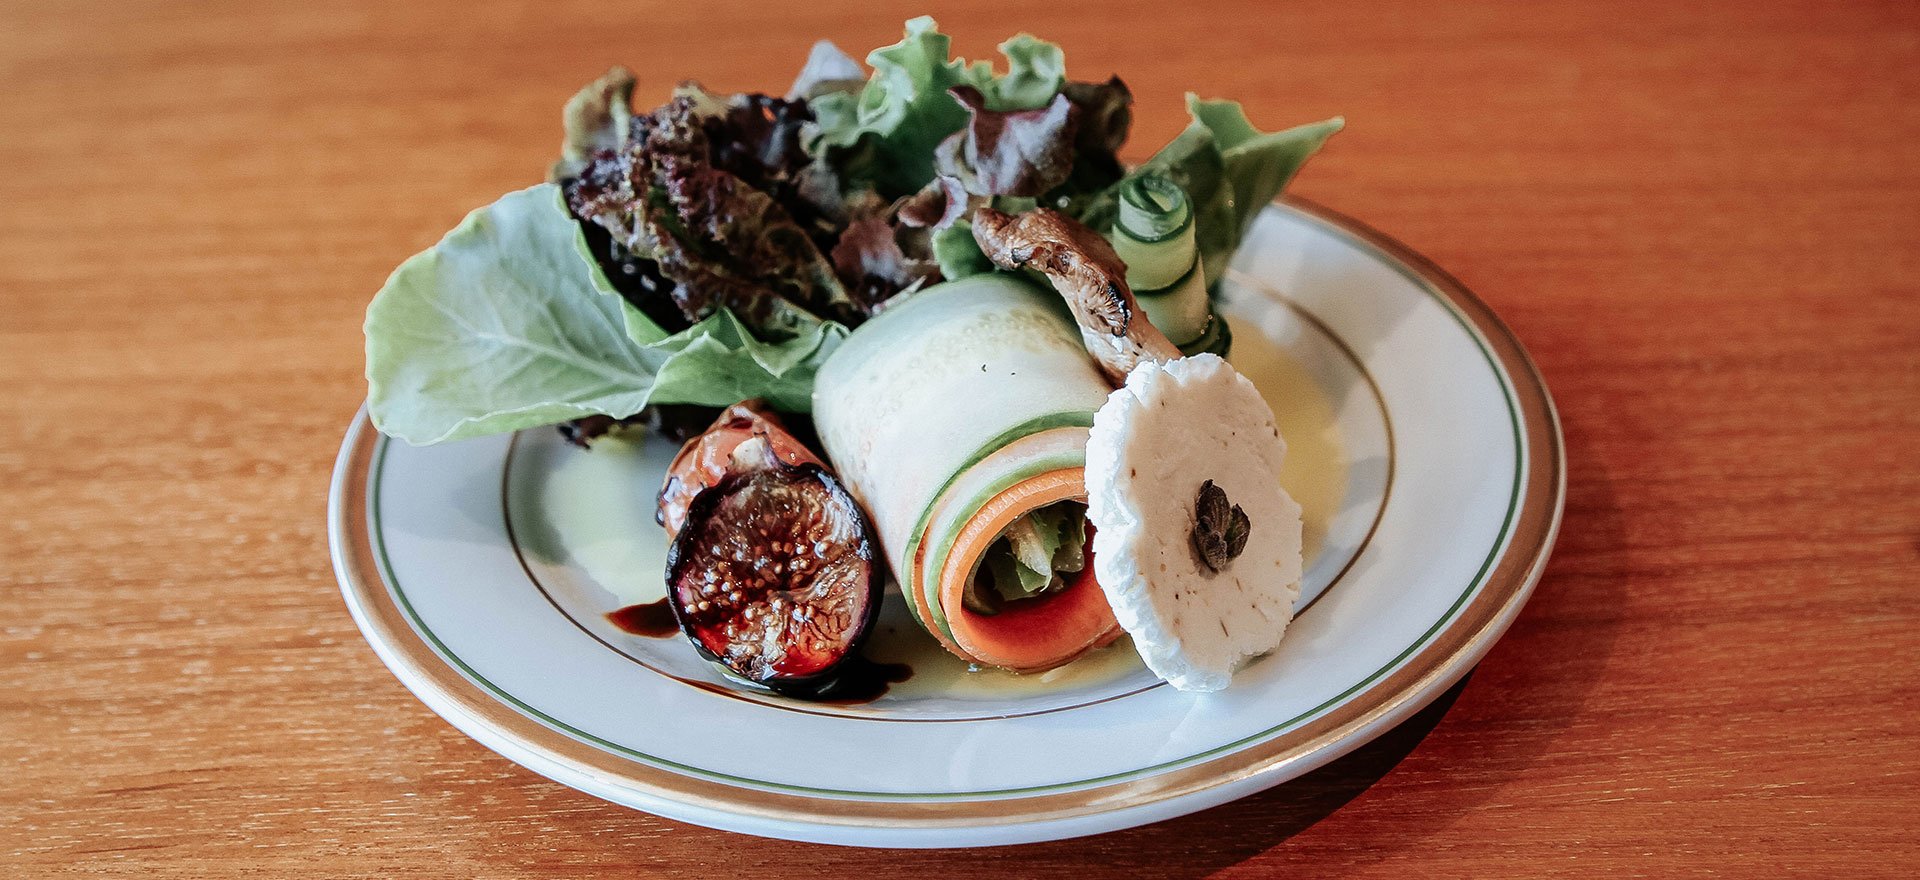 Artisan-styled catering dish featuring leafy greens, goat cheese, rolled zucchini and figs.